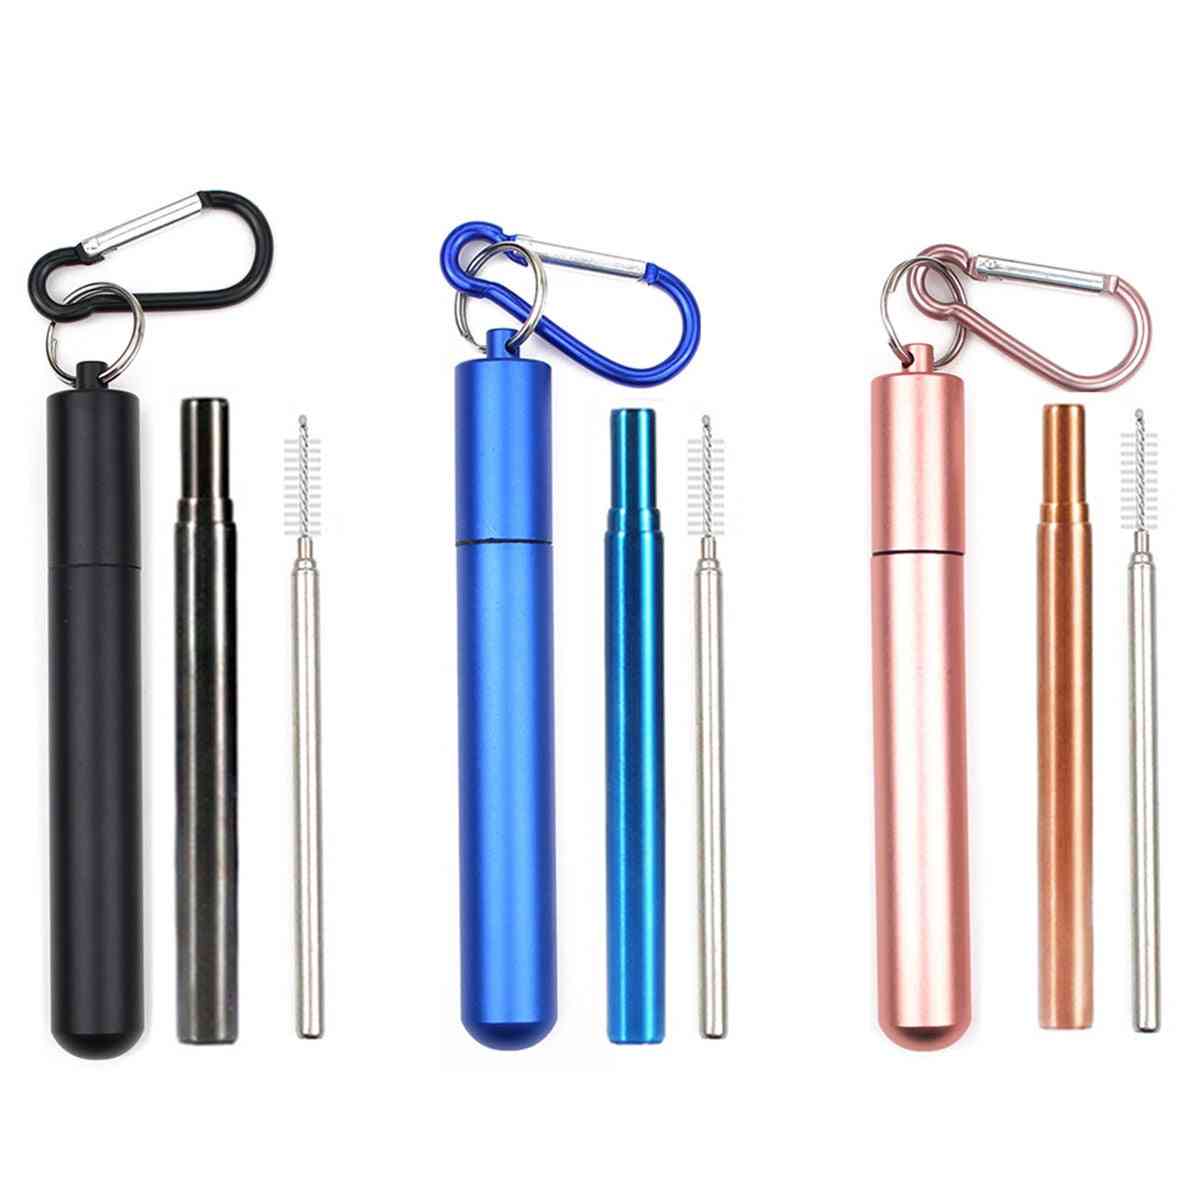 Reusable Stainless Steel Straws With Aluminum Keychain Case Cleaning Brush